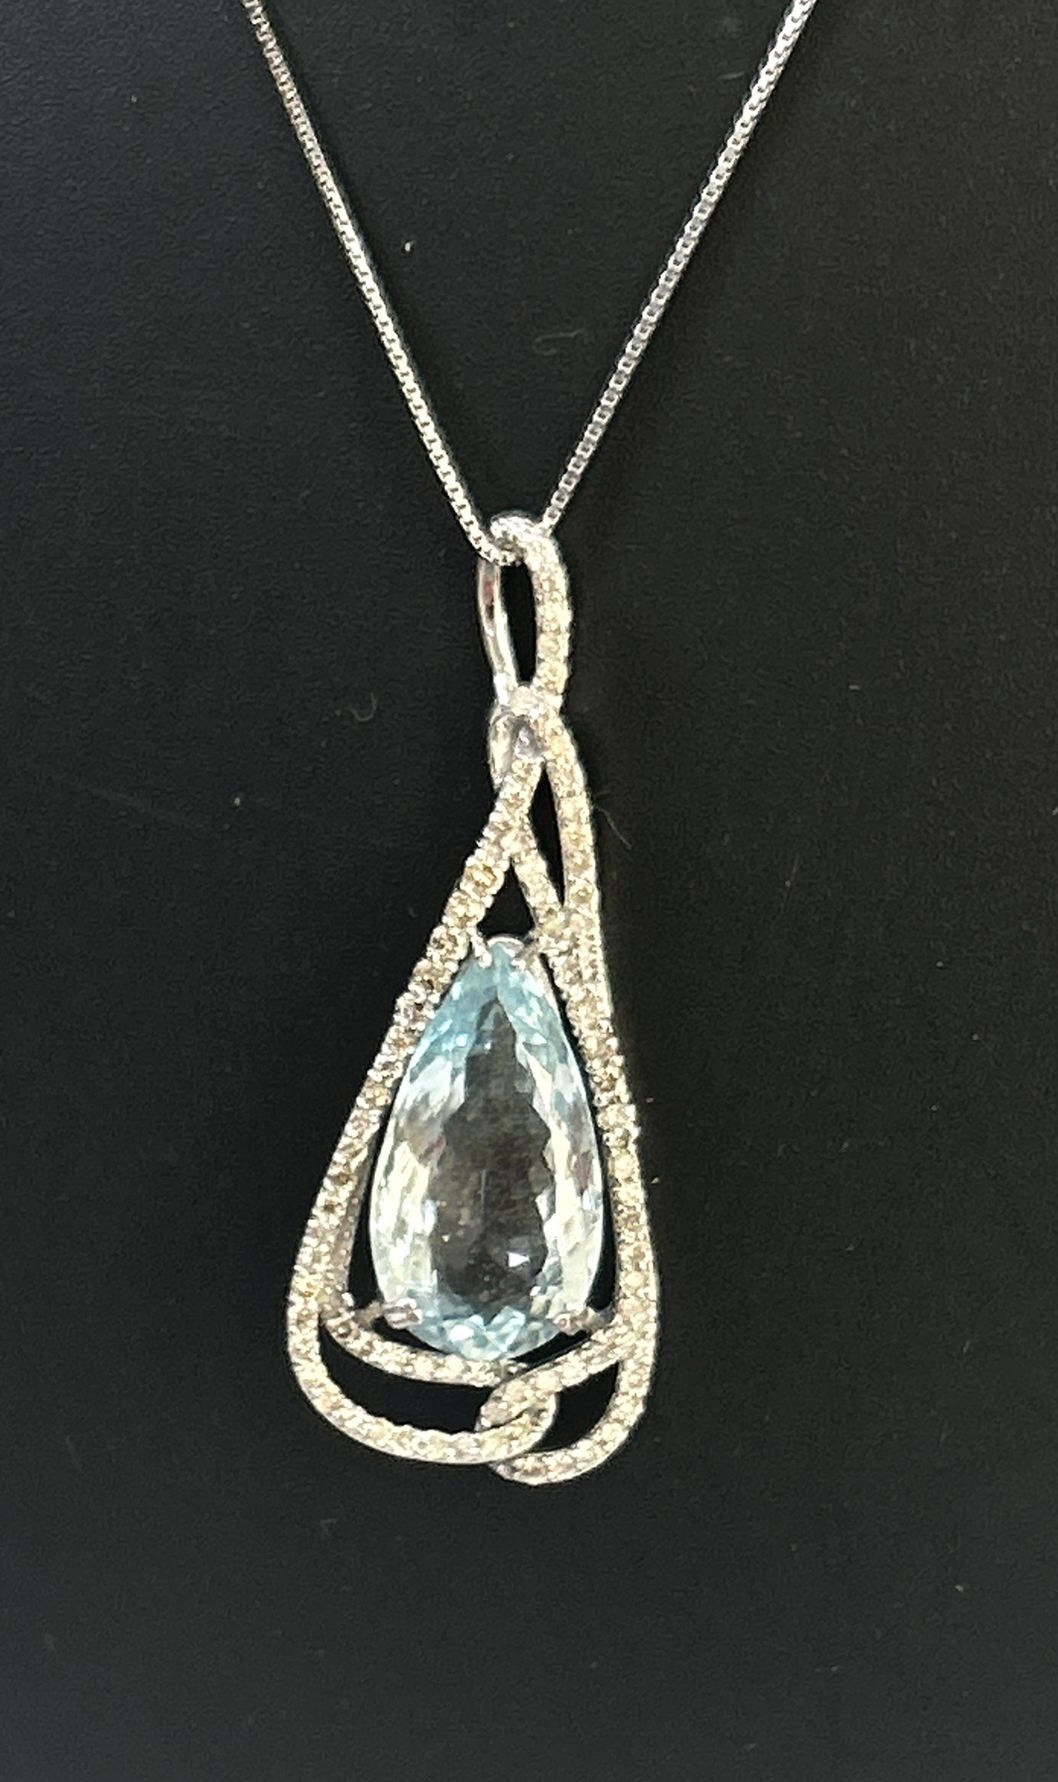 Beautiful Natural Flawless 8.81 CT Aquamarine Pendant With Diamonds and 18k Gold - Image 5 of 8